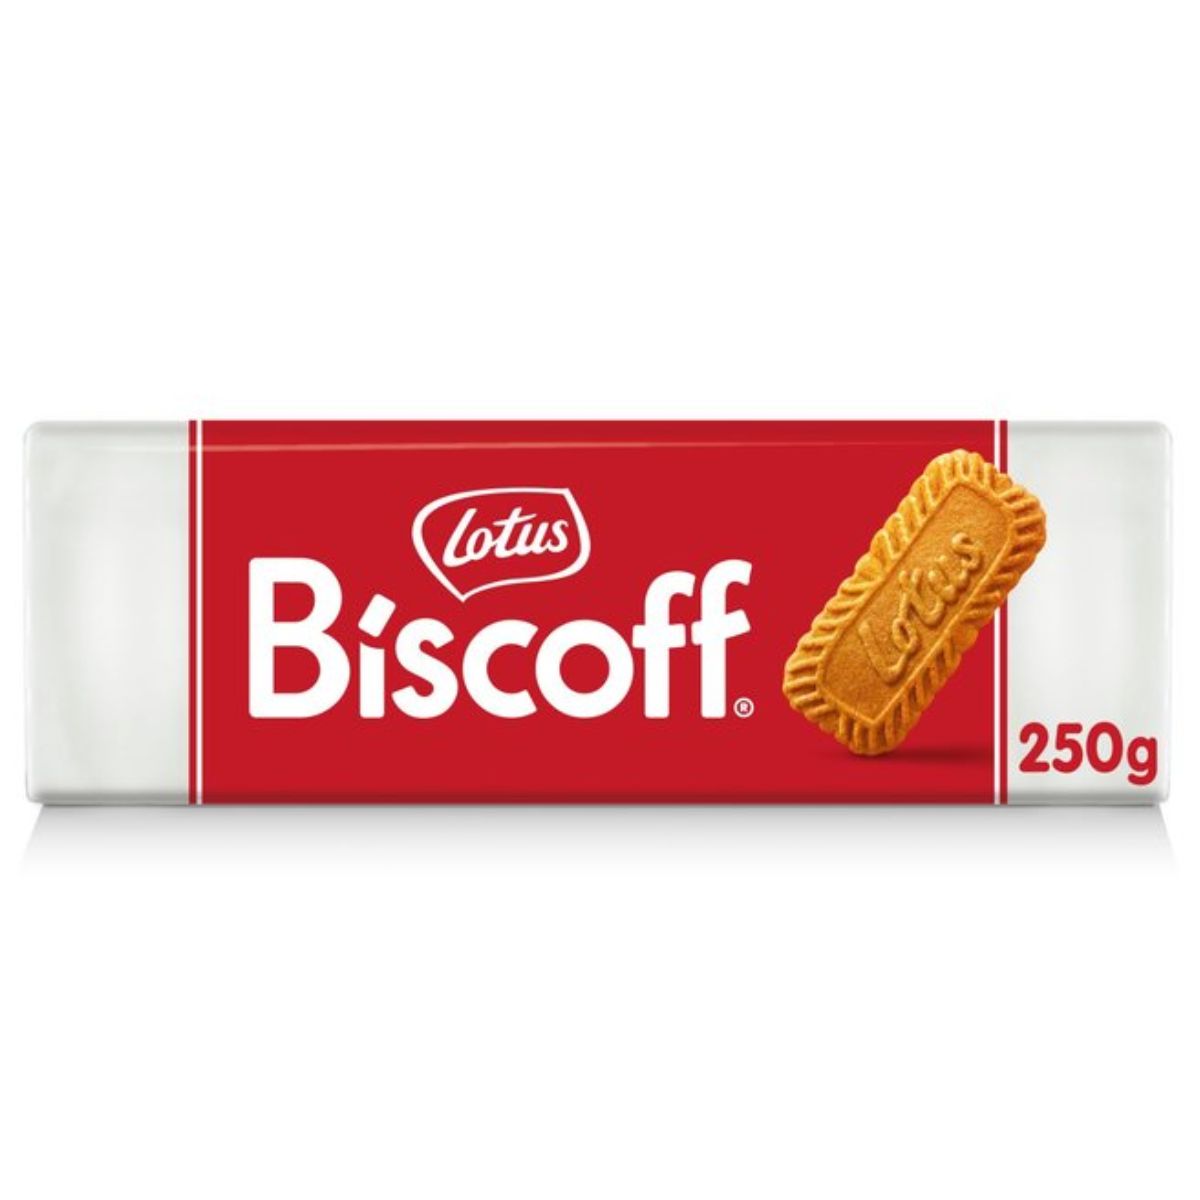 A bar of Lotus - Biscoff Original Caramelised Biscuit - 250g on a white background.